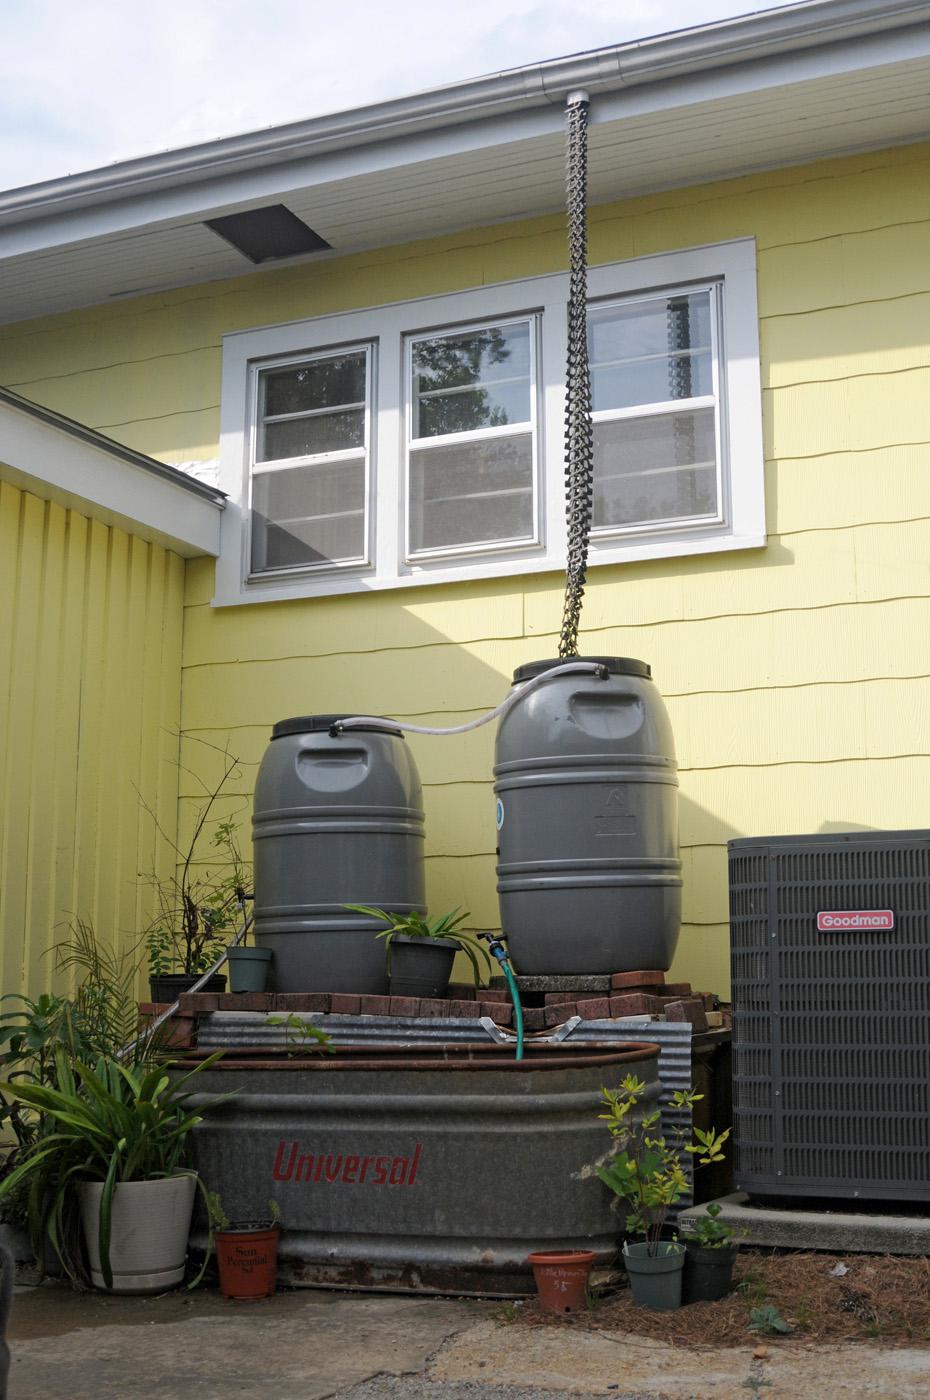 Rain barrels collect water for homeowners to use in their landscapes. The collected water is free and does not have any of the residual chemicals found in tap water. (Photo by Kat Lawrence)